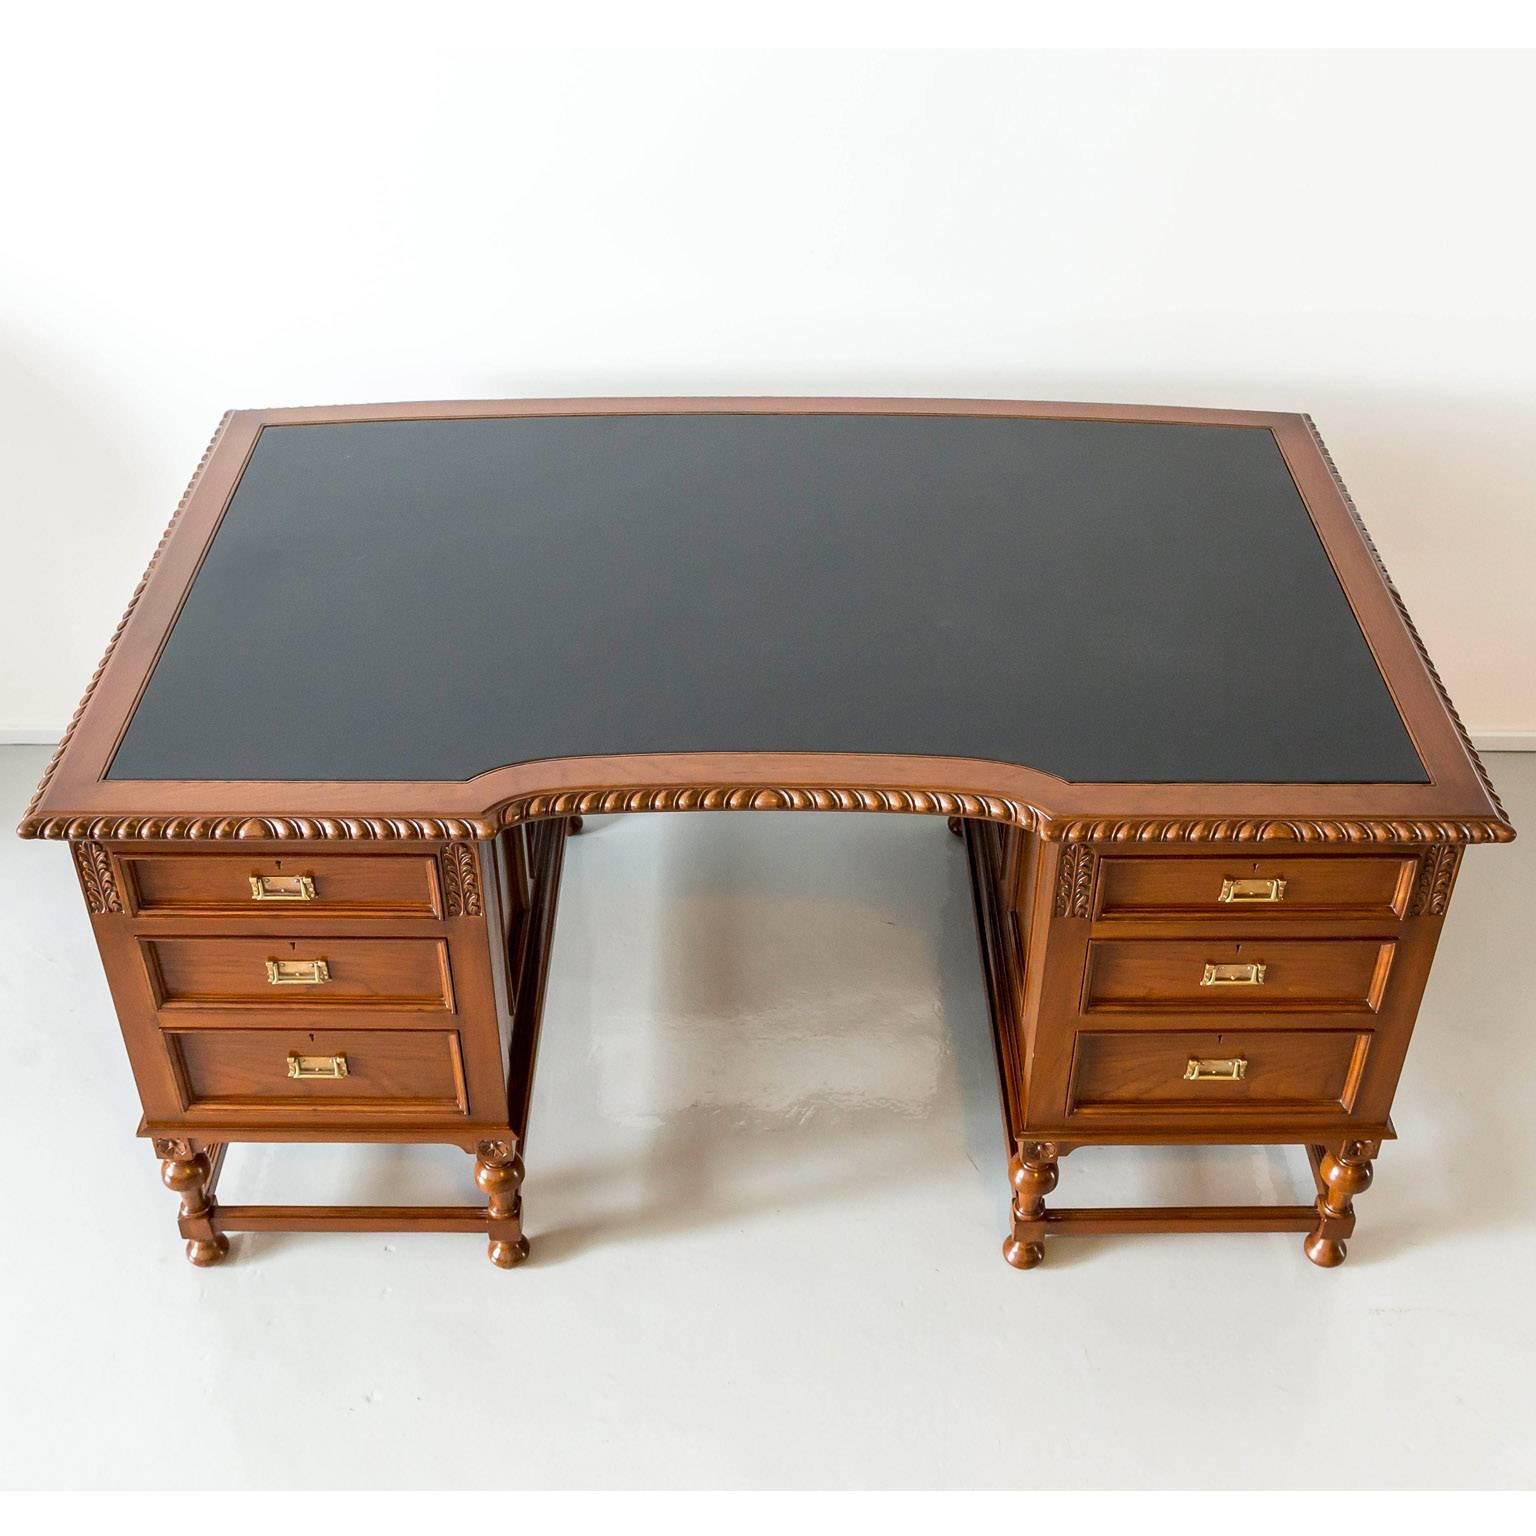 19th Century Antique Anglo-Indian or British Colonial Teak Wood Desk For Sale